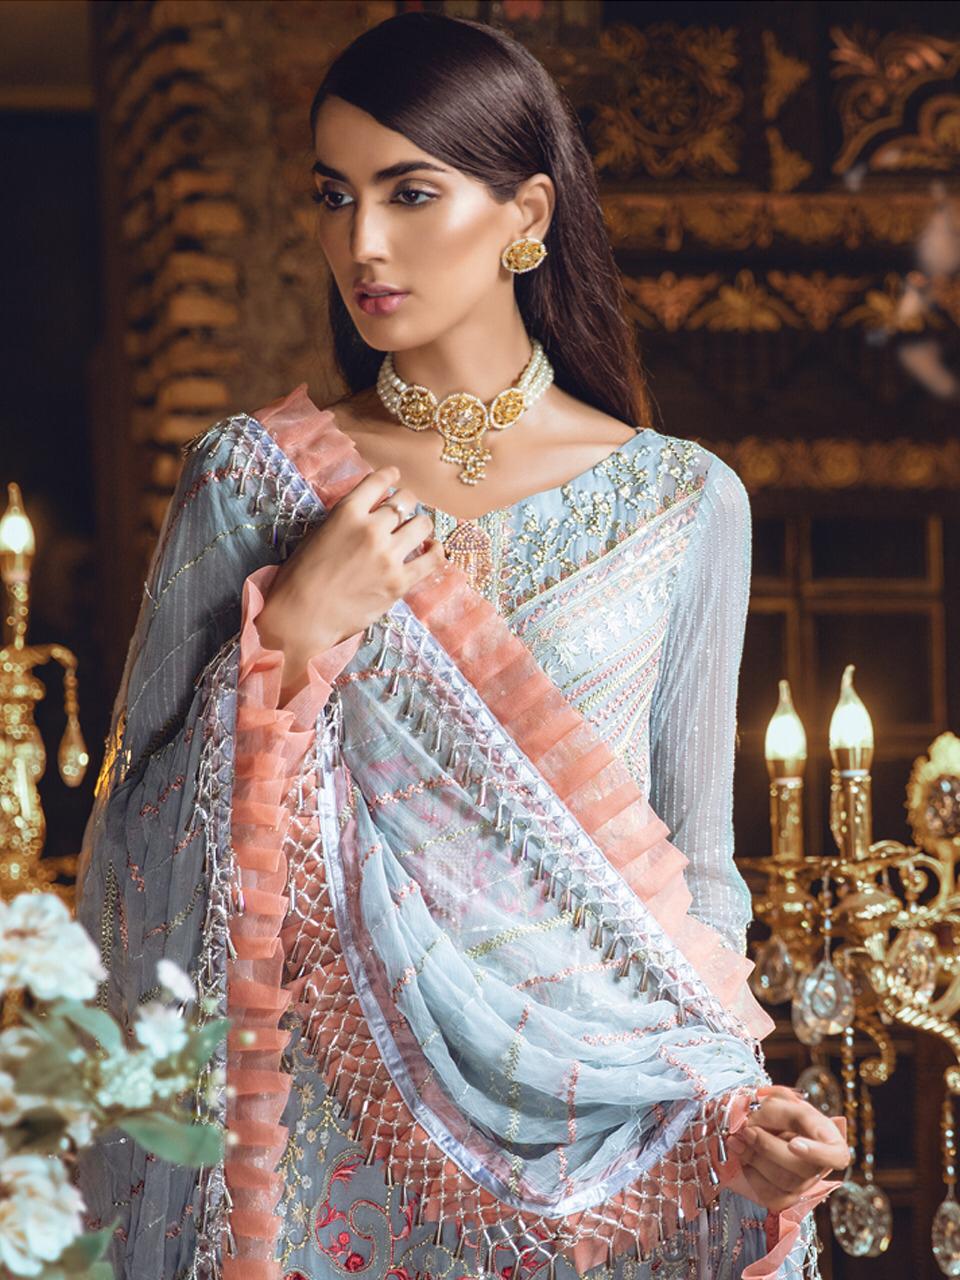 Fepic rosemeen Colours bridal wear heavy embroidered salwar kameez collection